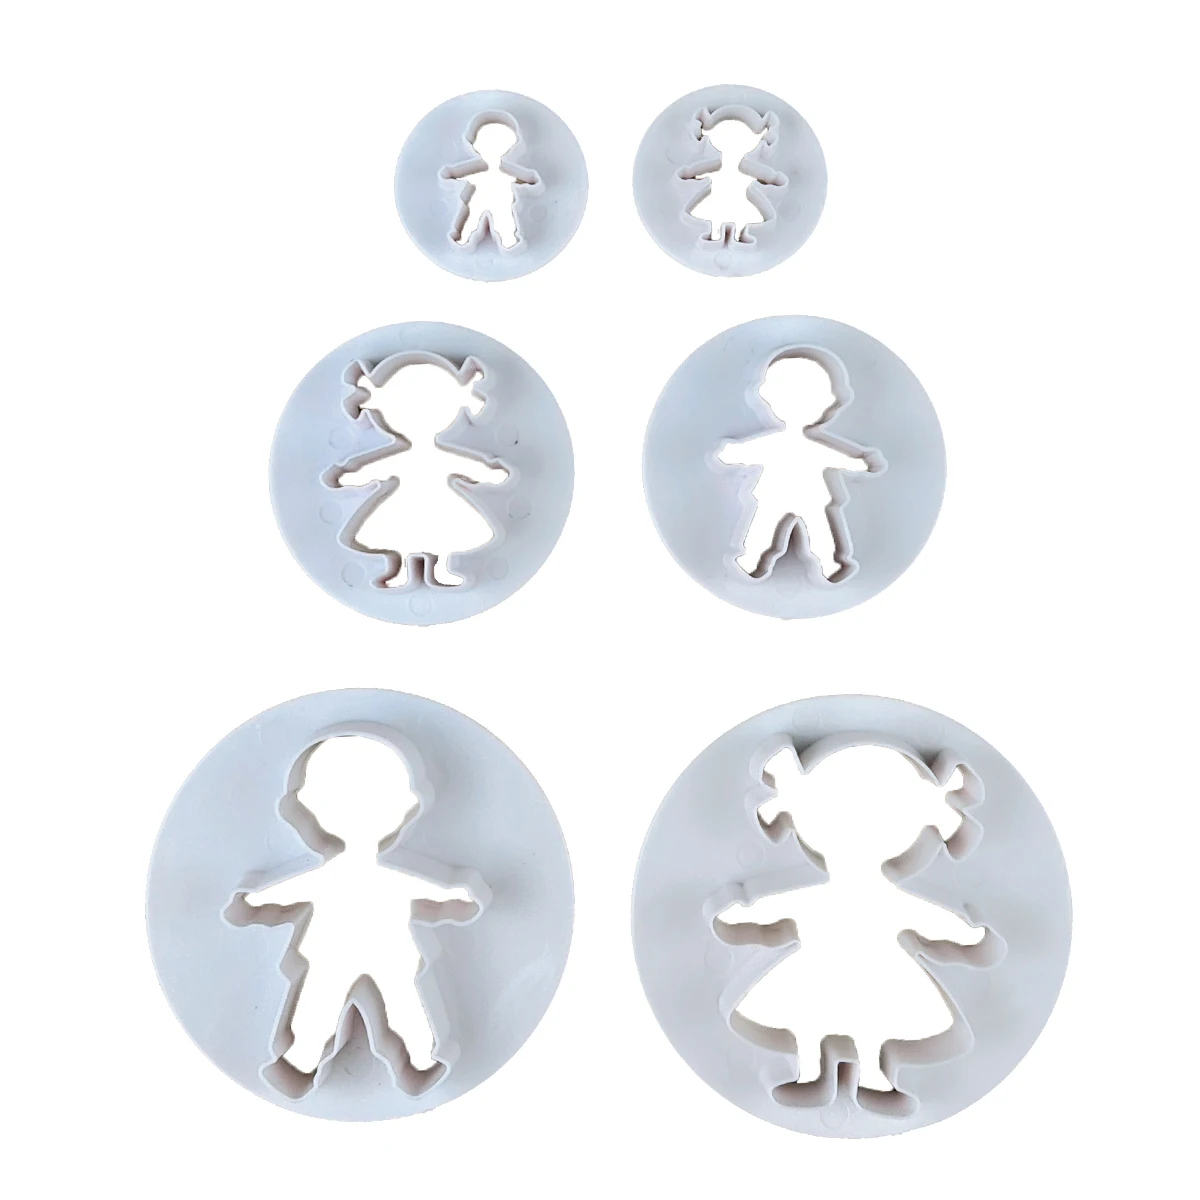 

3Pcs Boys / Girls Cake Fondant Cookie Cutter Mold Biscuit Decor Kitchen Bakeware Baking Tools Set Pastry And Bakery Accessories